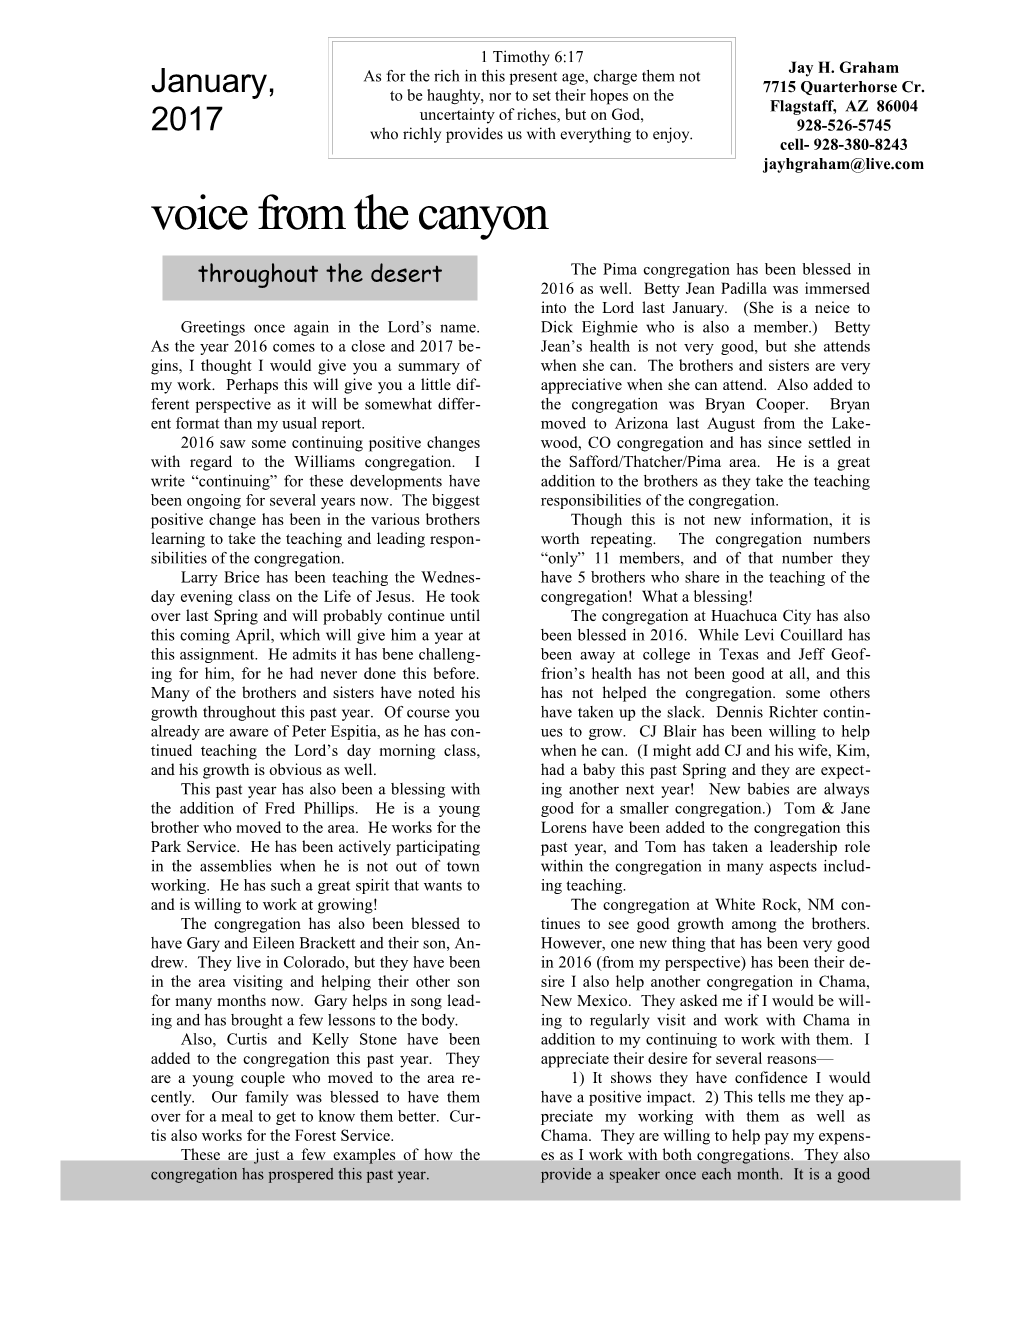 Voice from the Canyon